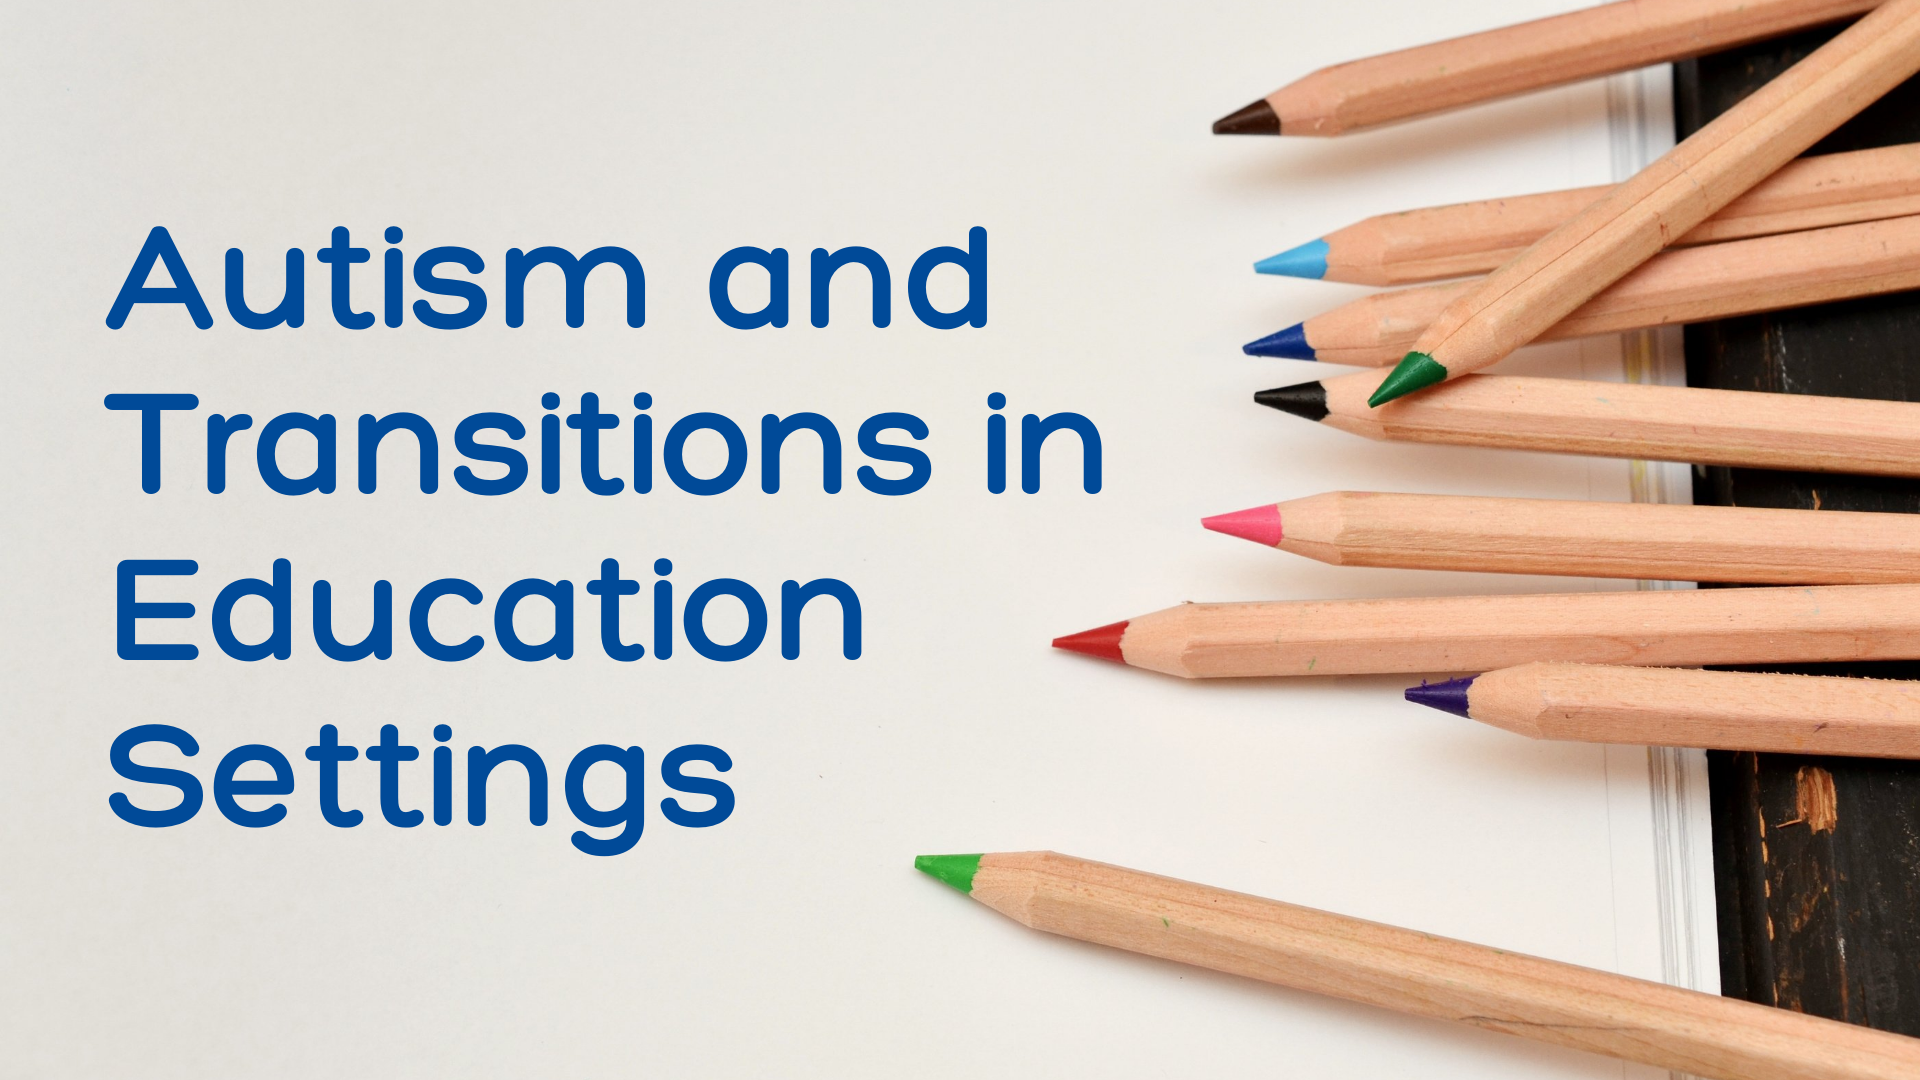 Autism and Transitions in Education Settings – Webinar